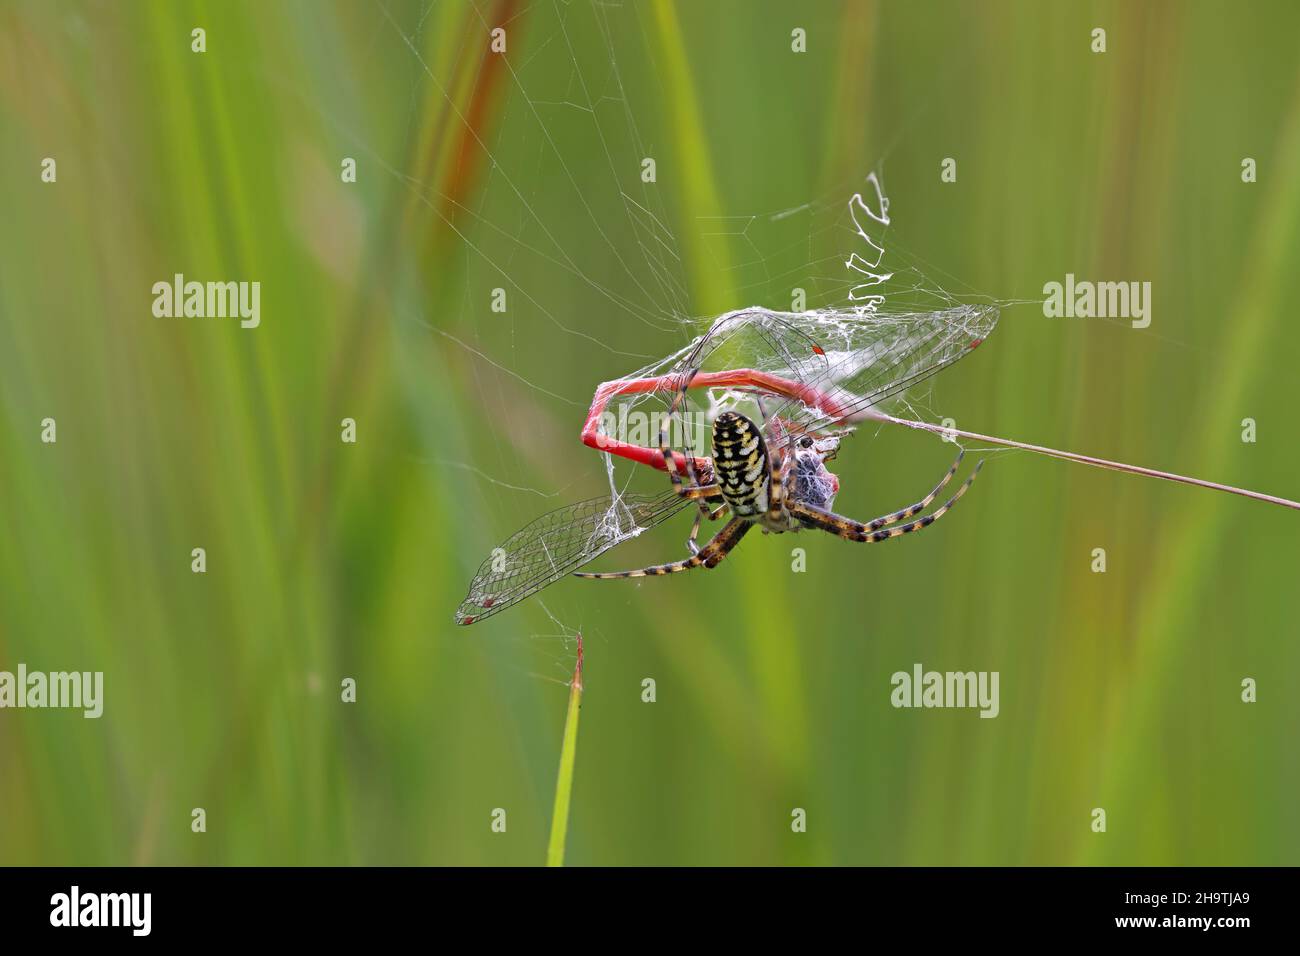 Black-and-yellow argiope, Black-and-yellow garden spider (Argiope bruennichi), wraps caught small red damselfly (Ceriagrion tenellum), Netherlands, Stock Photo